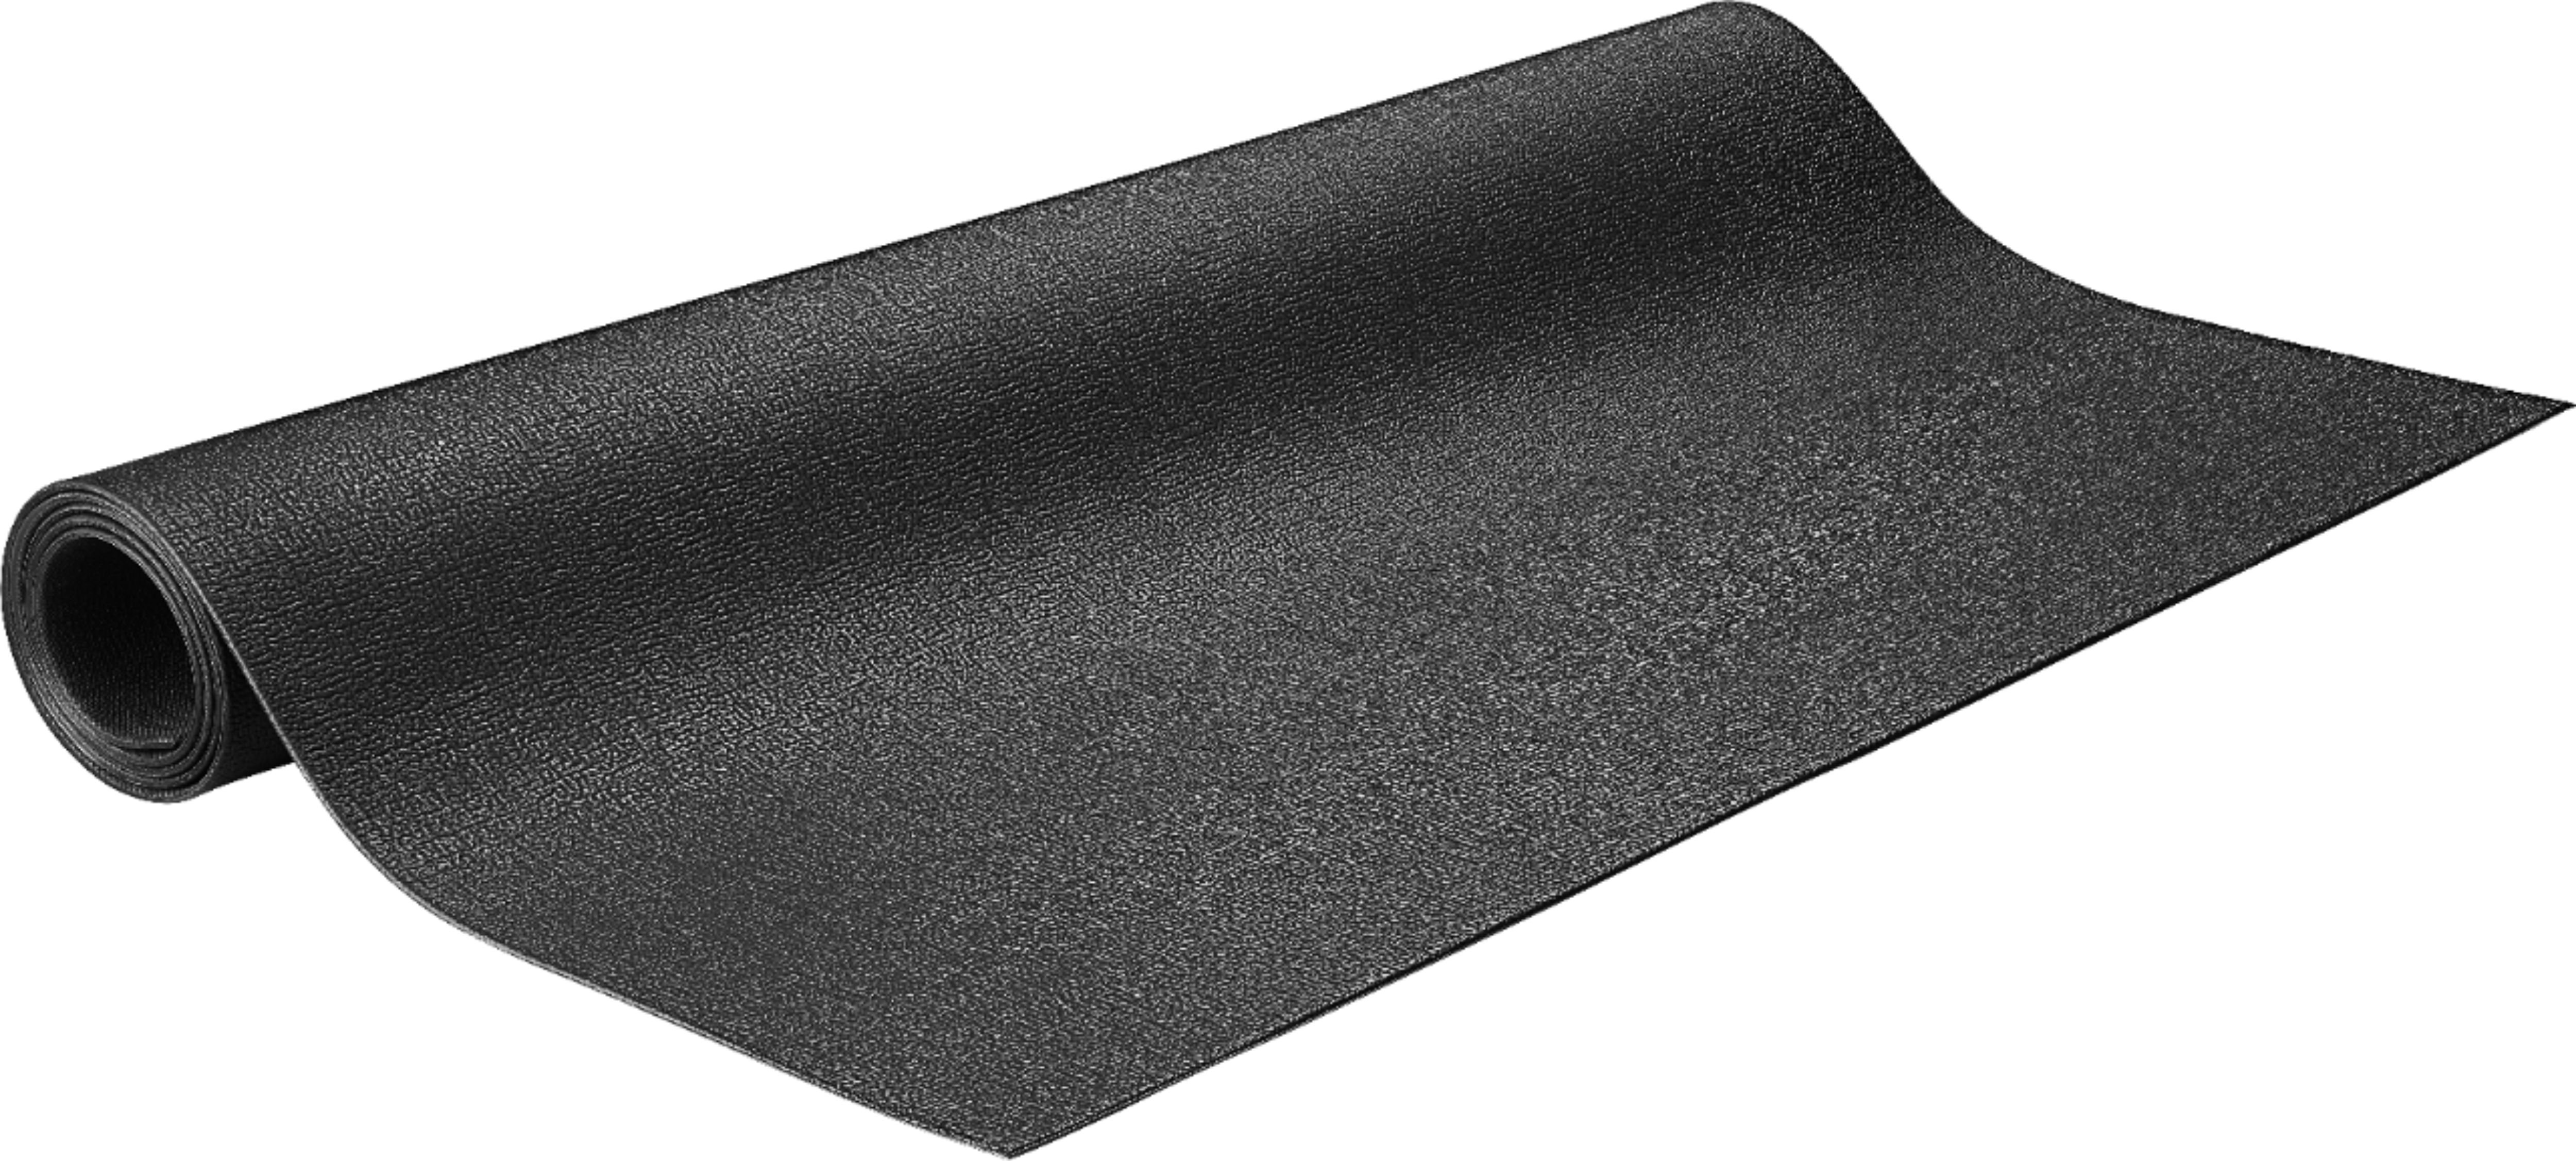 Insignia™ Large Exercise Equipment Mat Black NS-EXRCMTLG1 - Best Buy